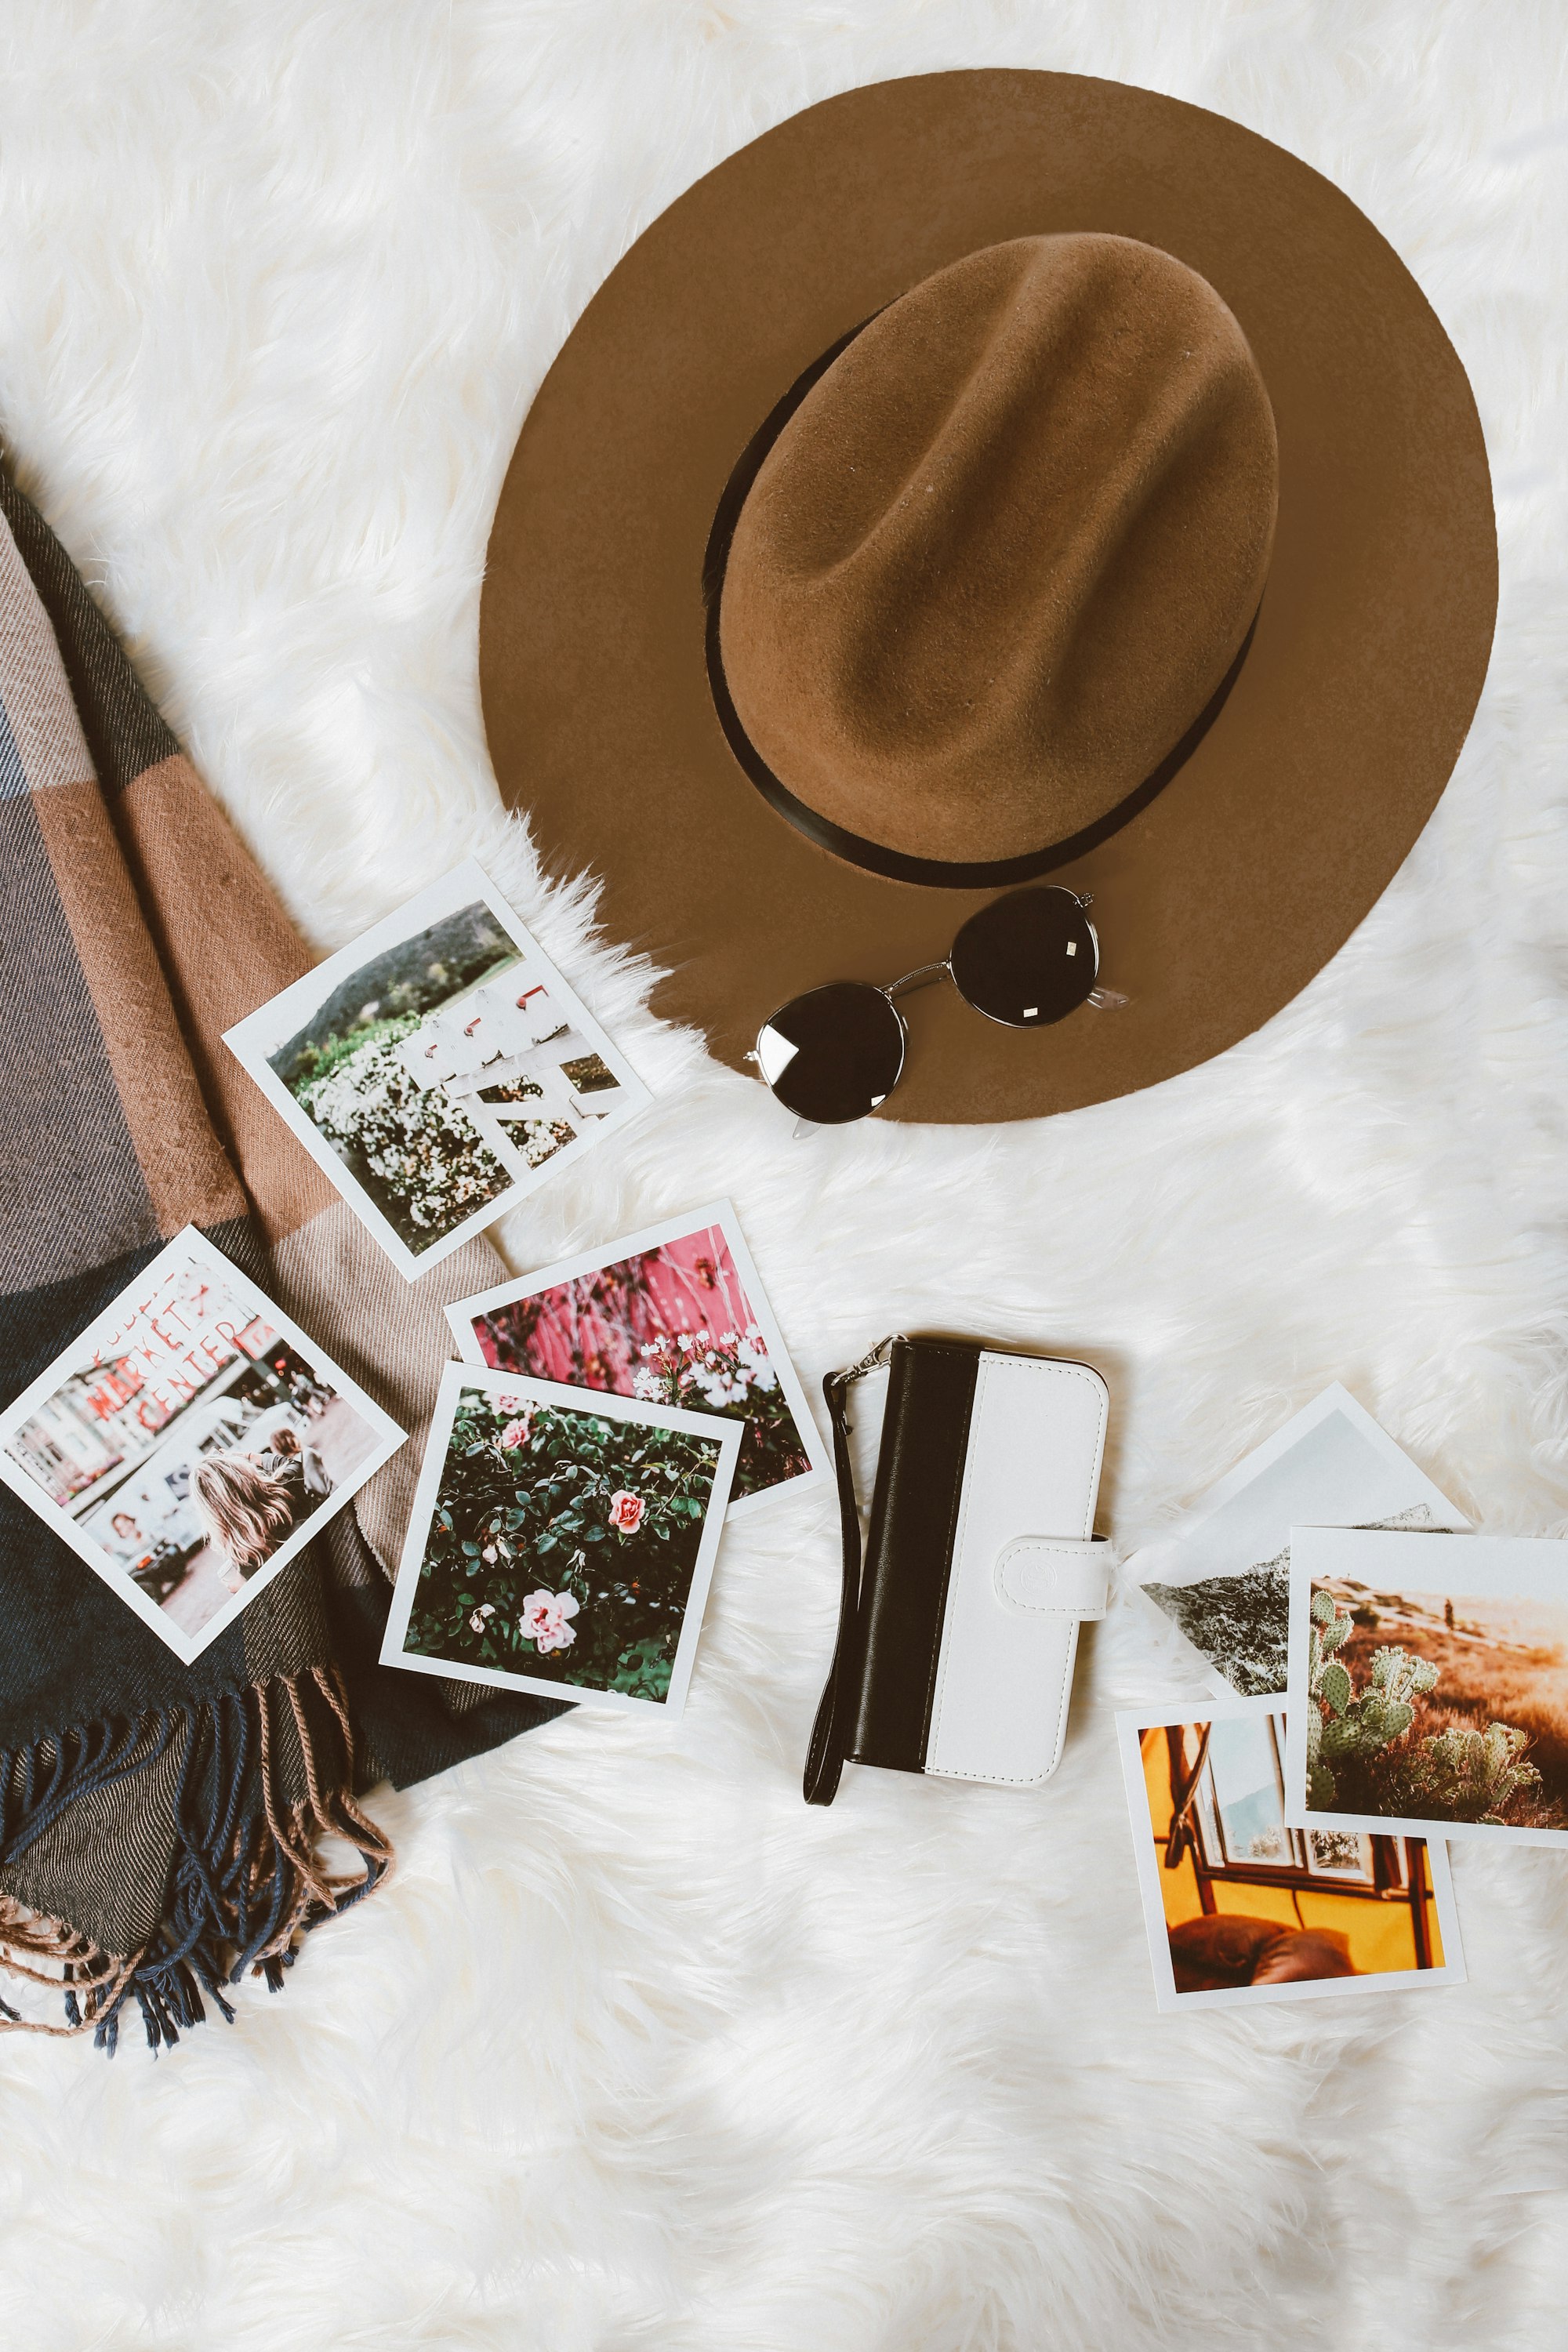 Hat and photos in flatlay